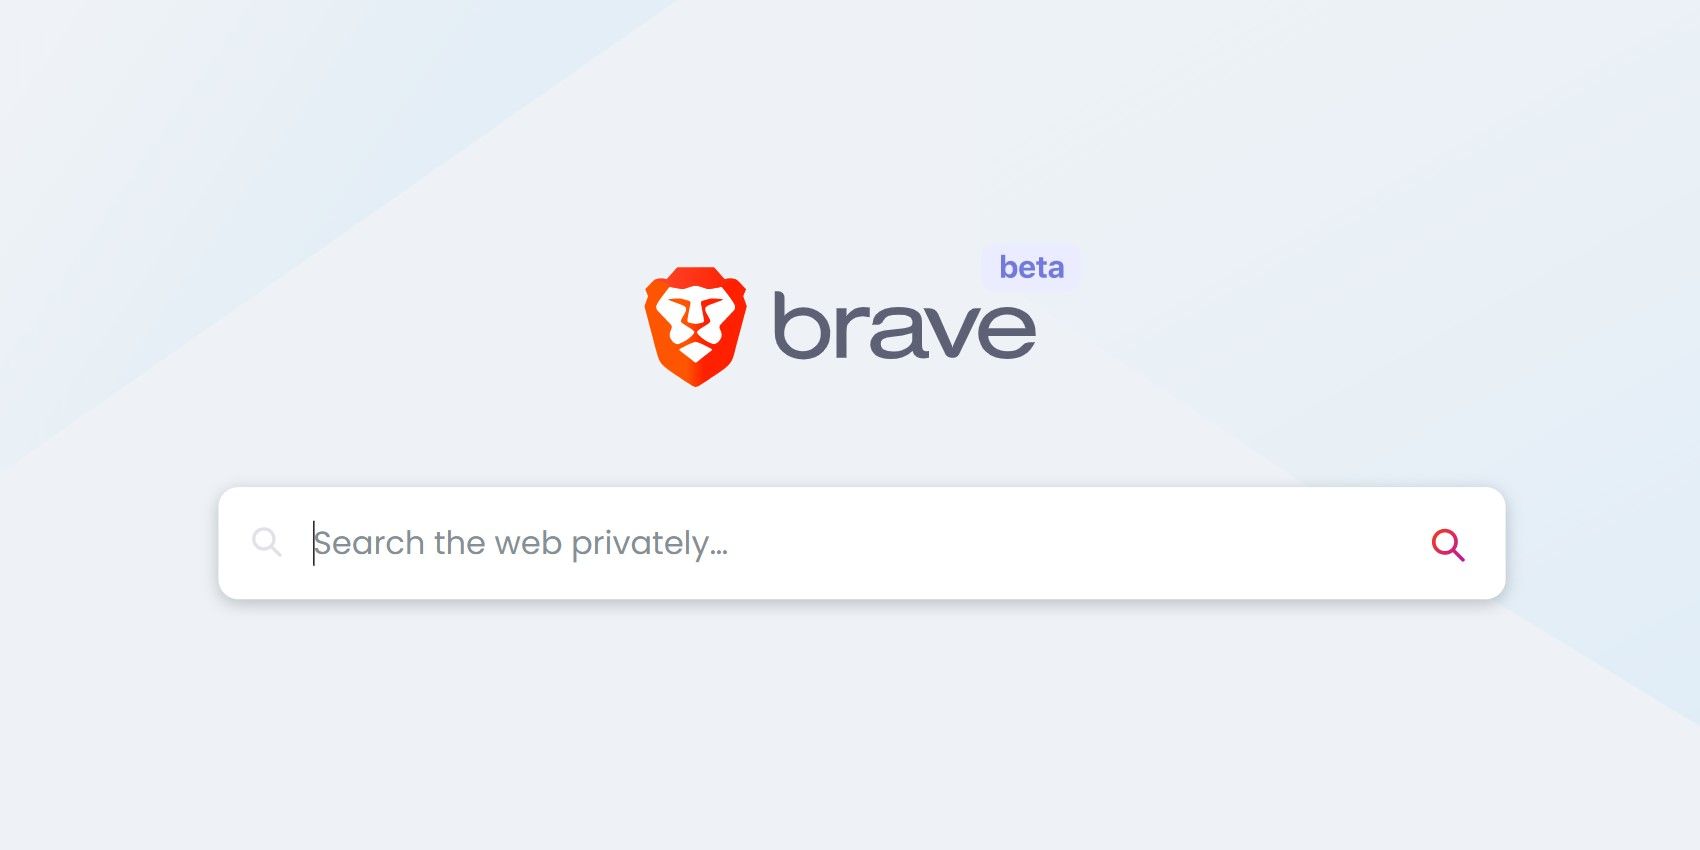 brave search engine review